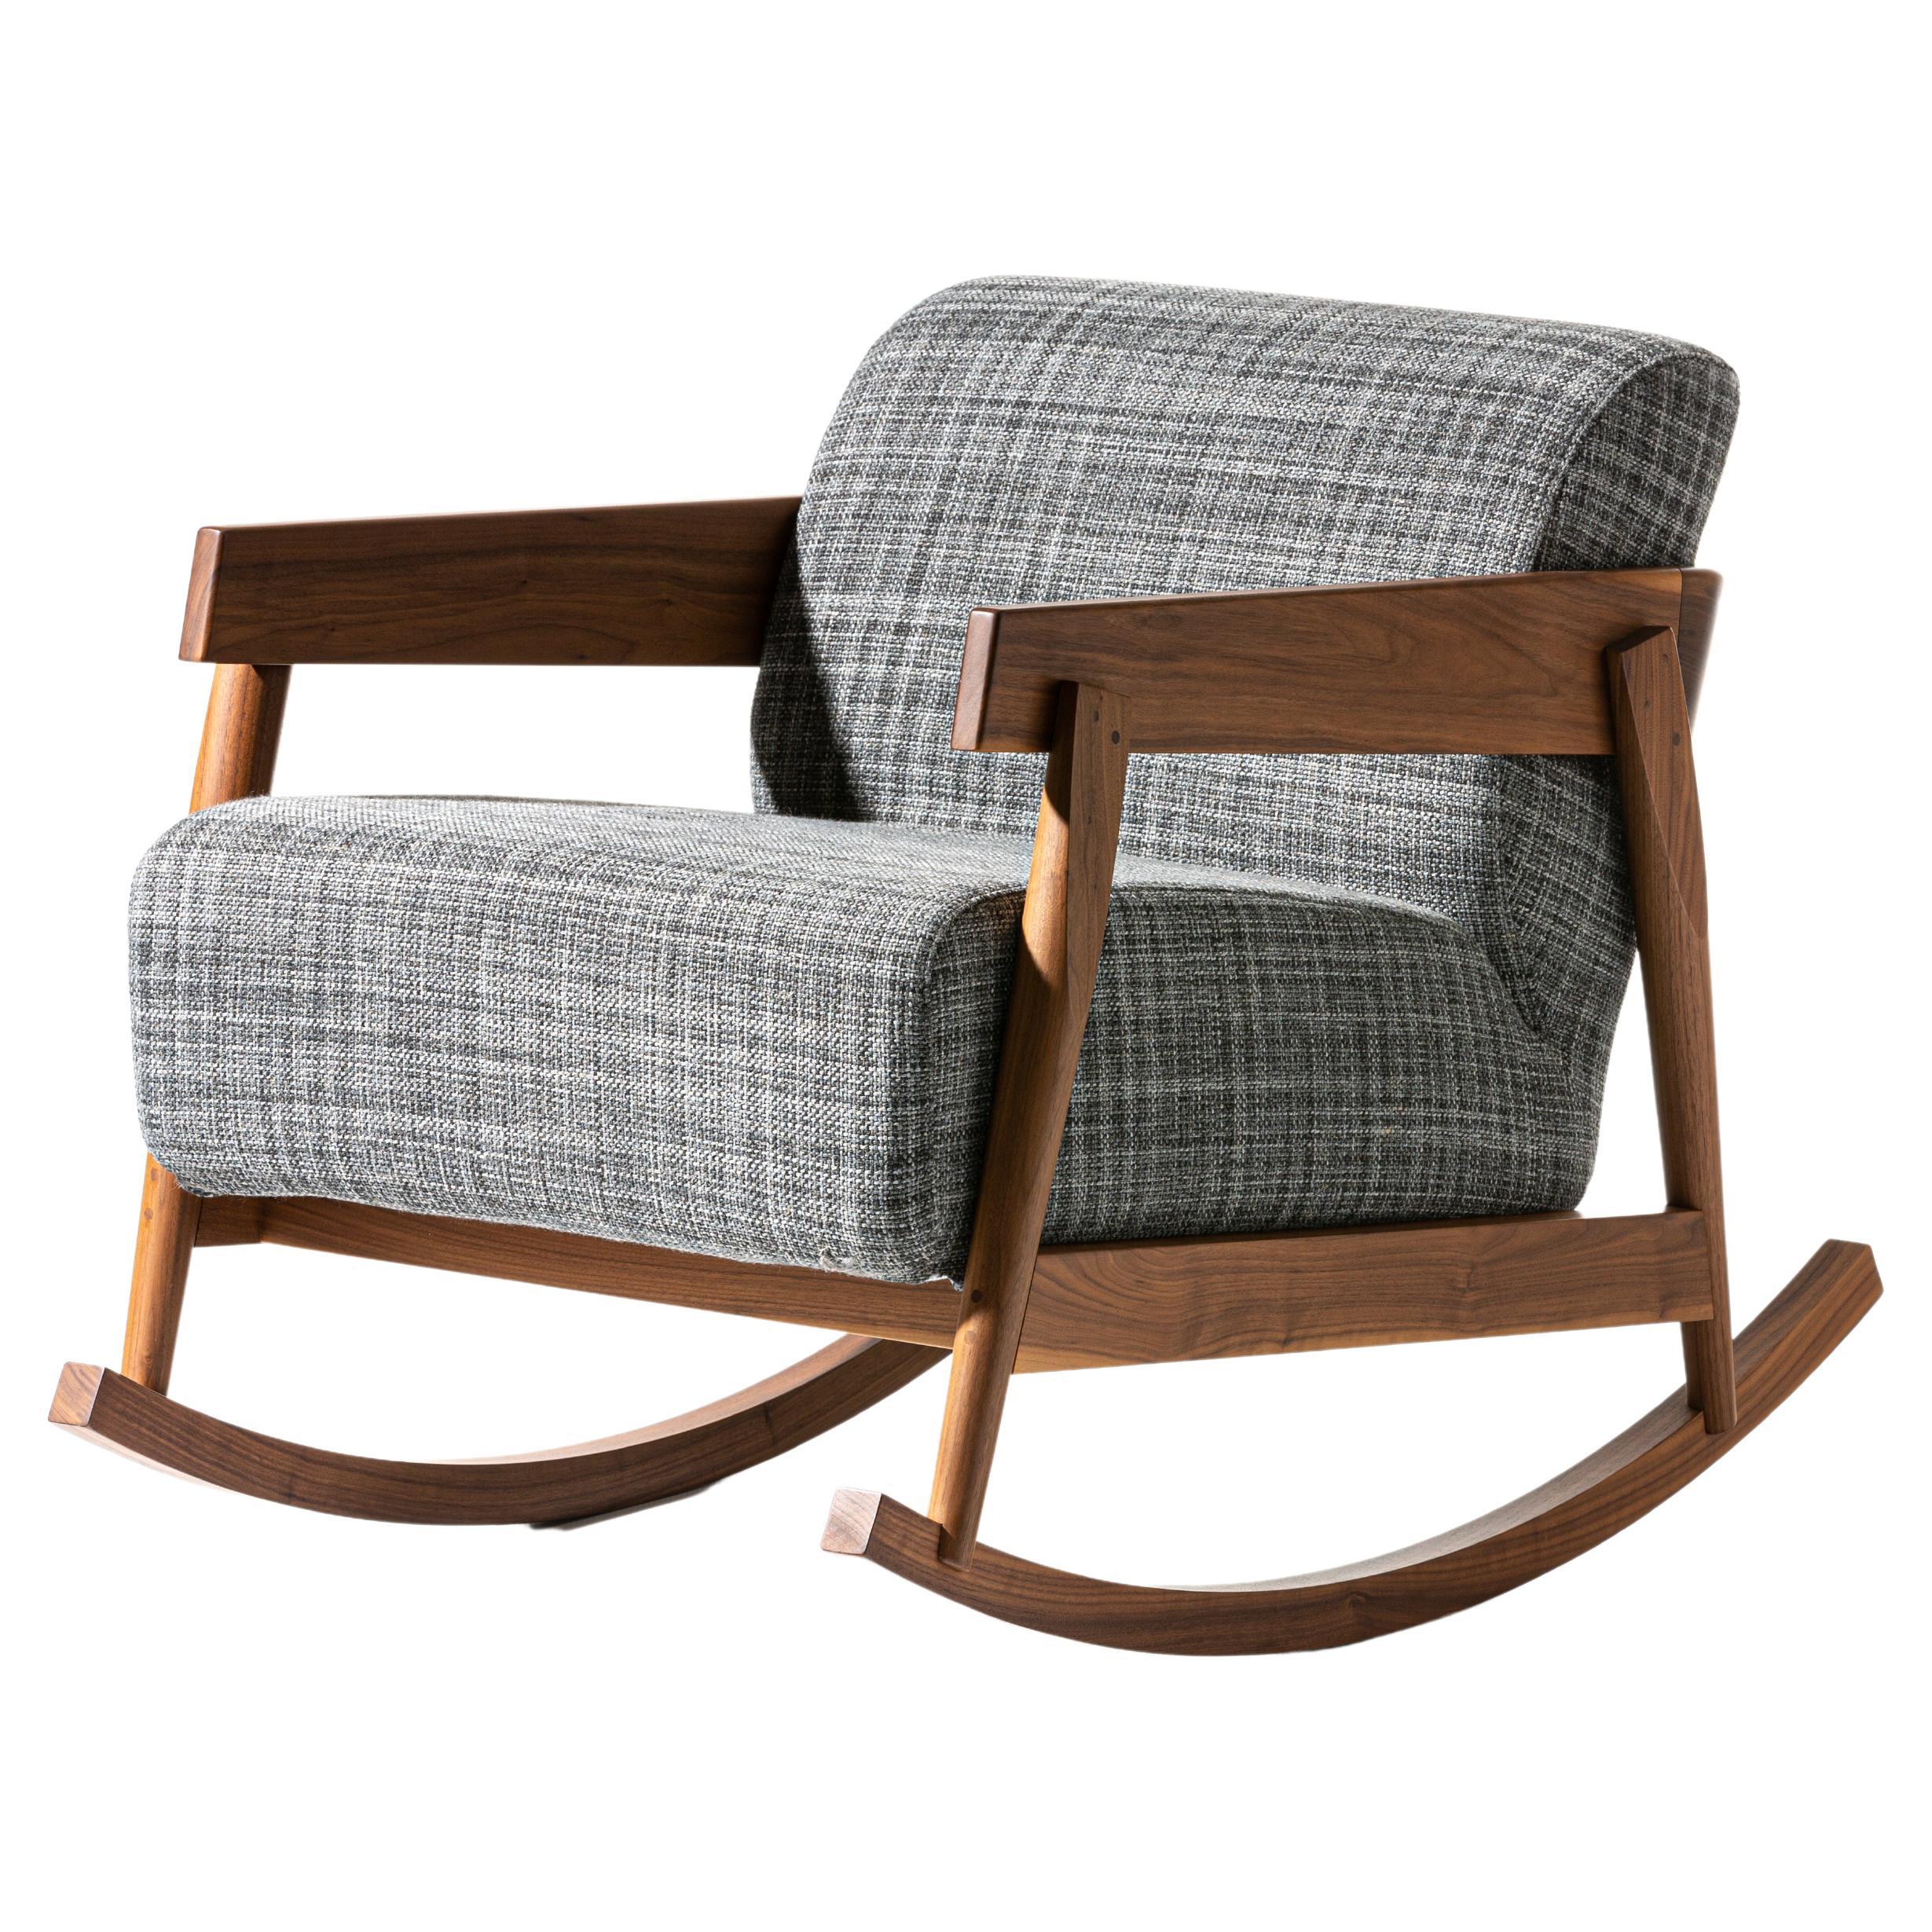 Gervasoni Brick Rocking Chair in Lisboa 05 Upholstery with Natural Walnut Base